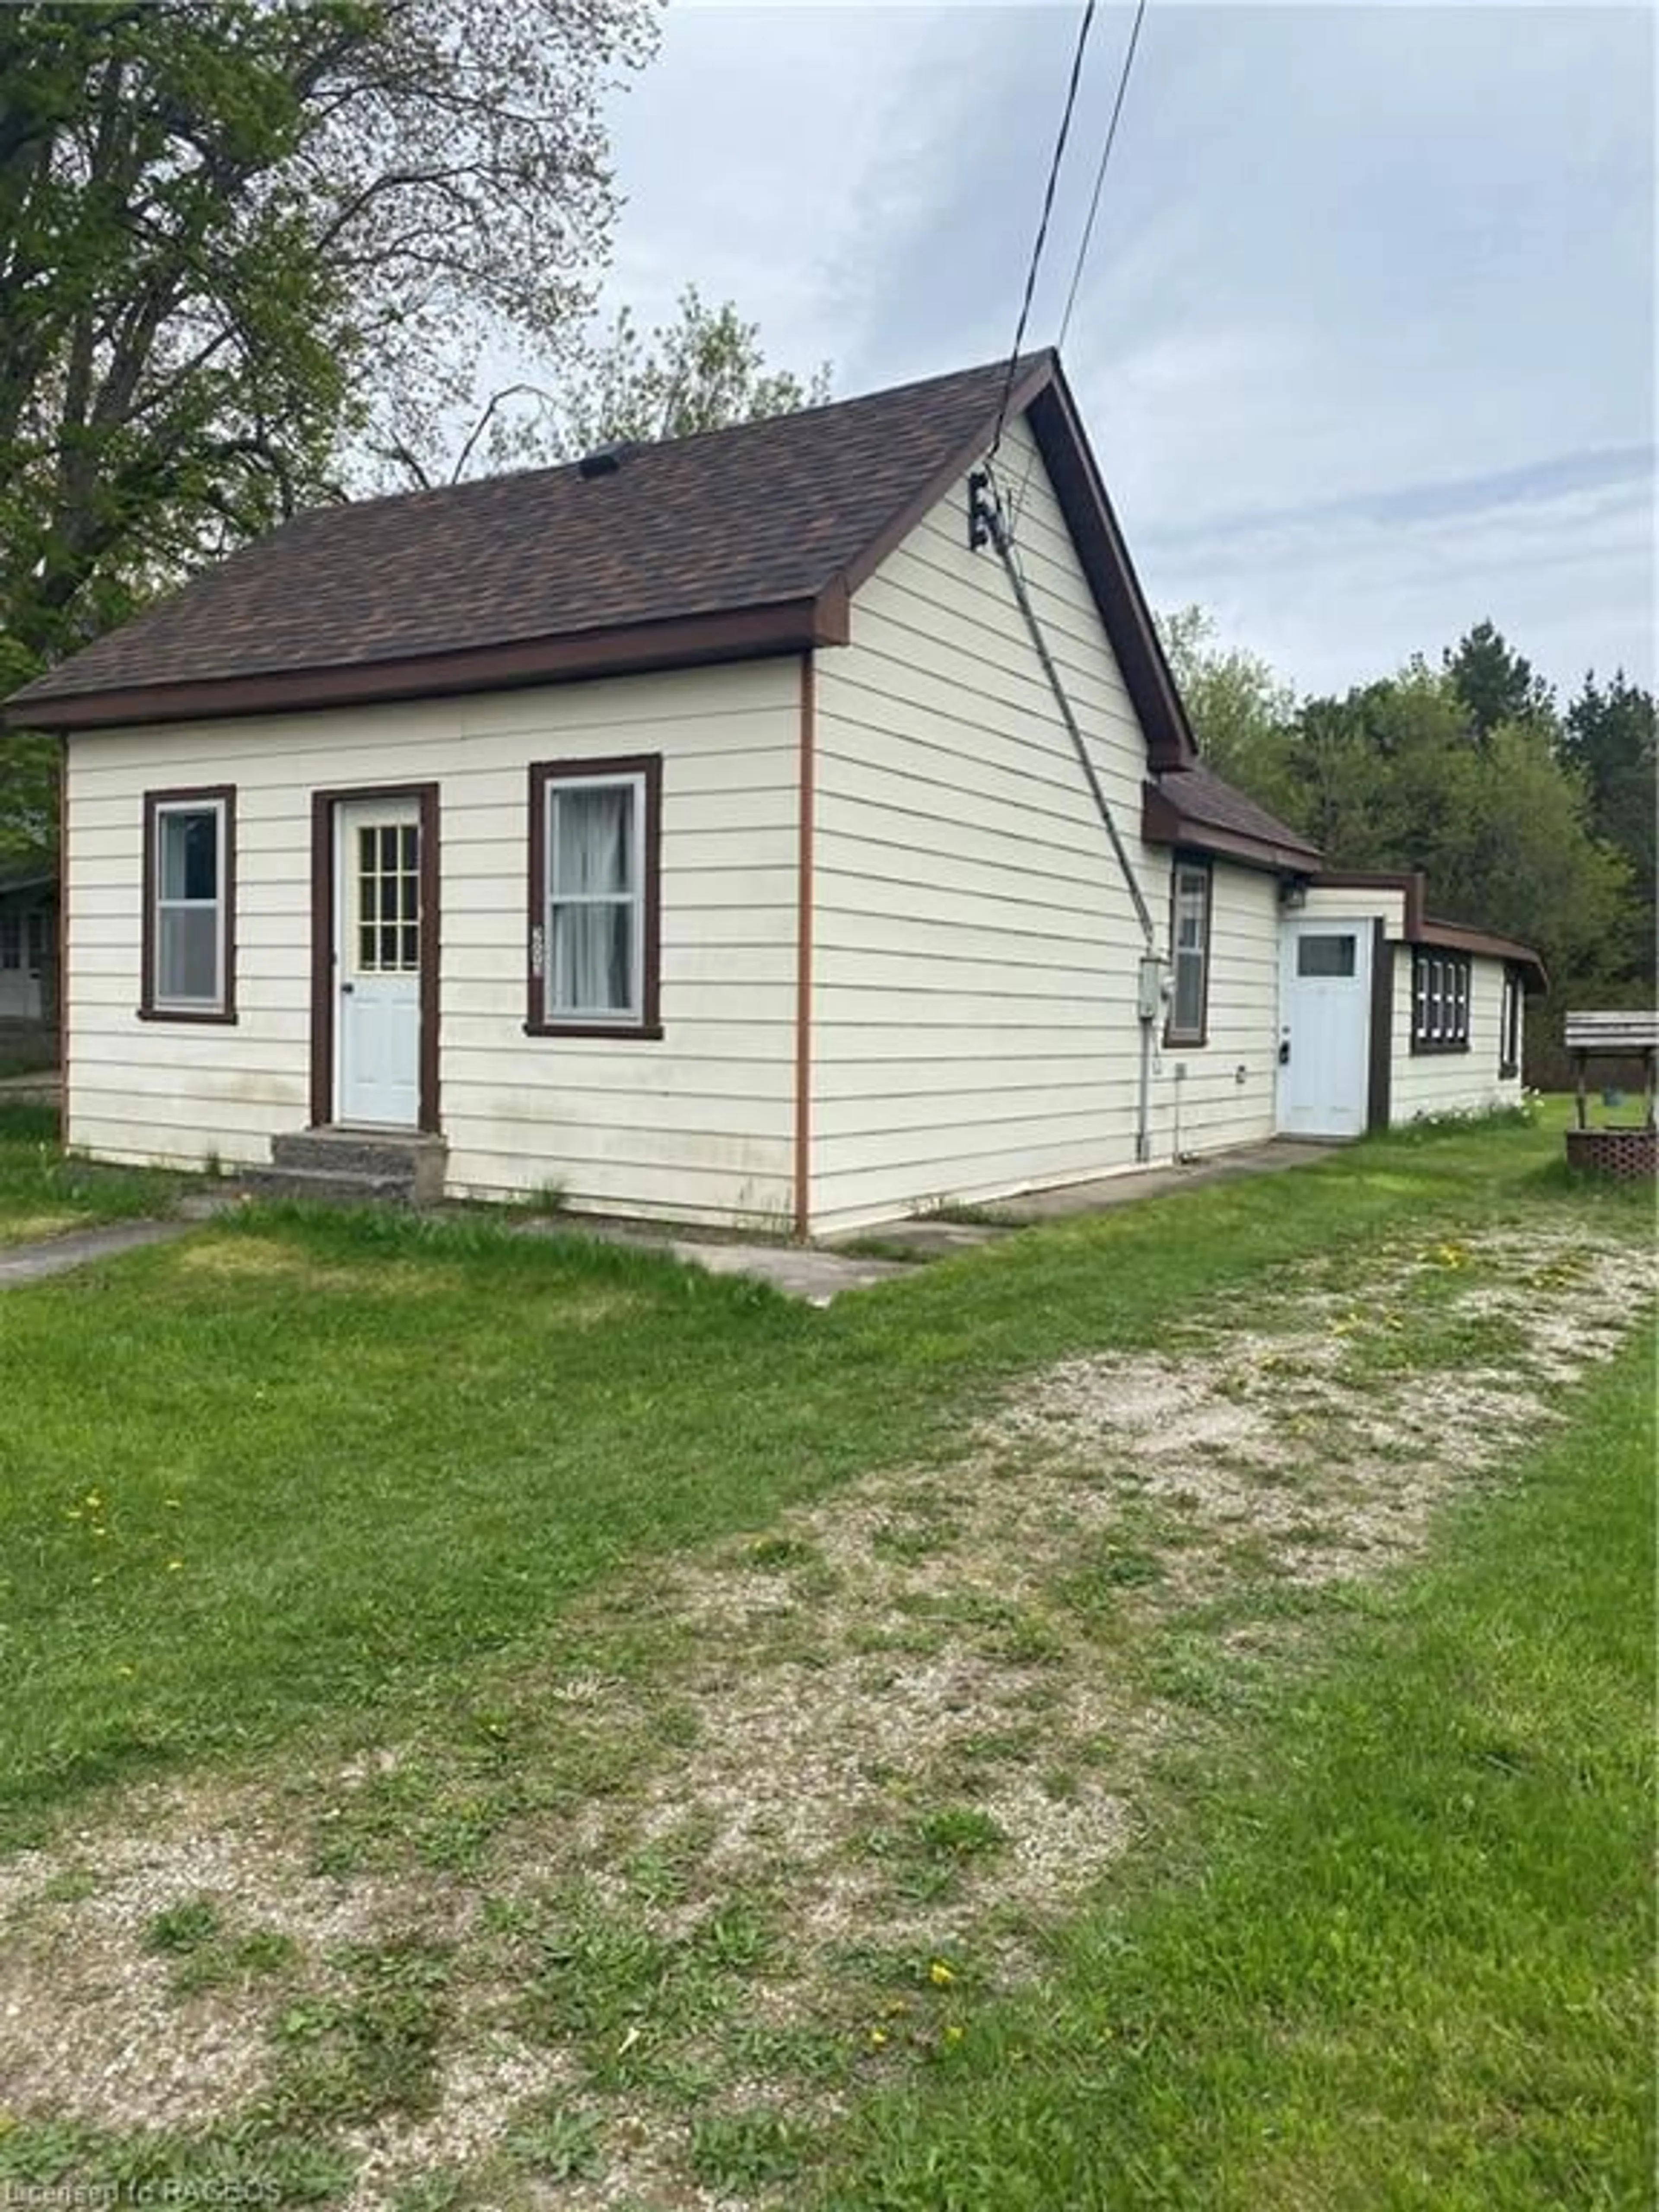 Cottage for 203 Queen St, Hepworth Ontario N0H 1P0